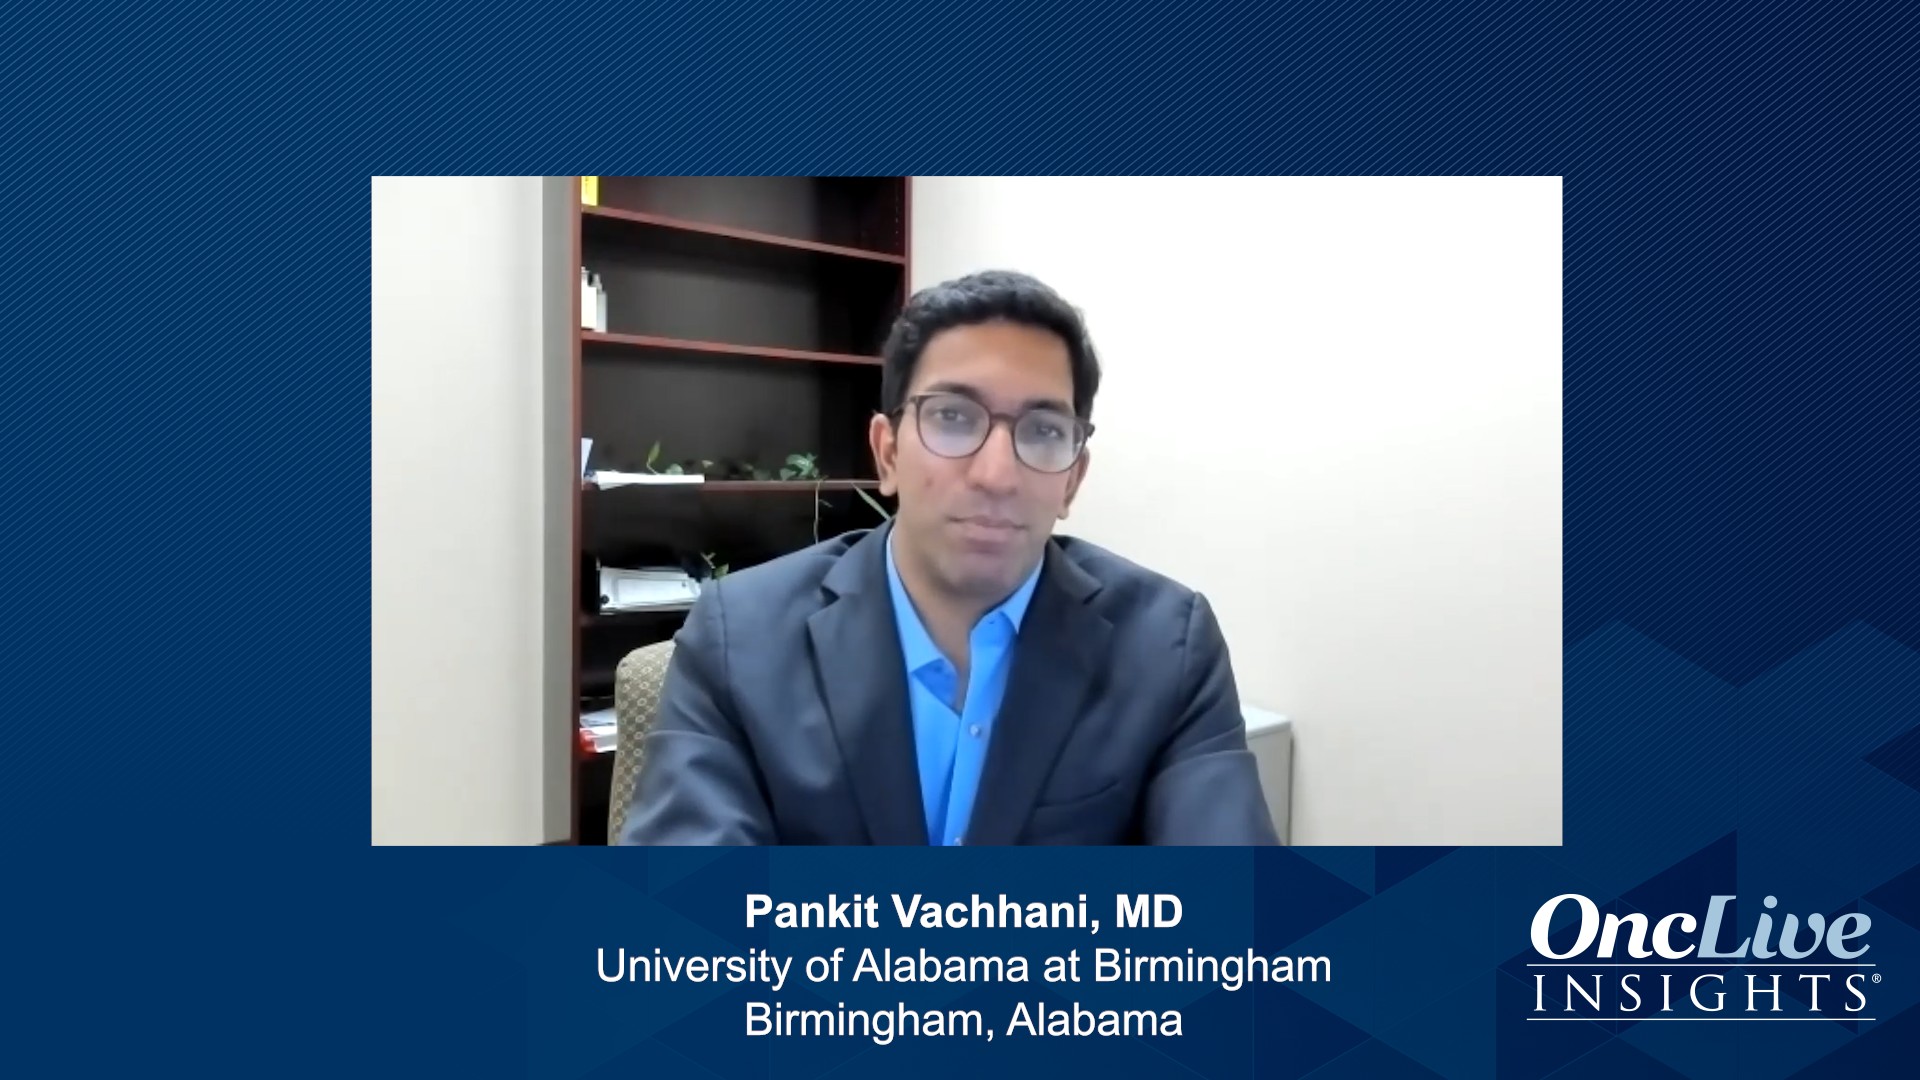 Post-Conference Perspectives: Myeloproliferative Neoplasms